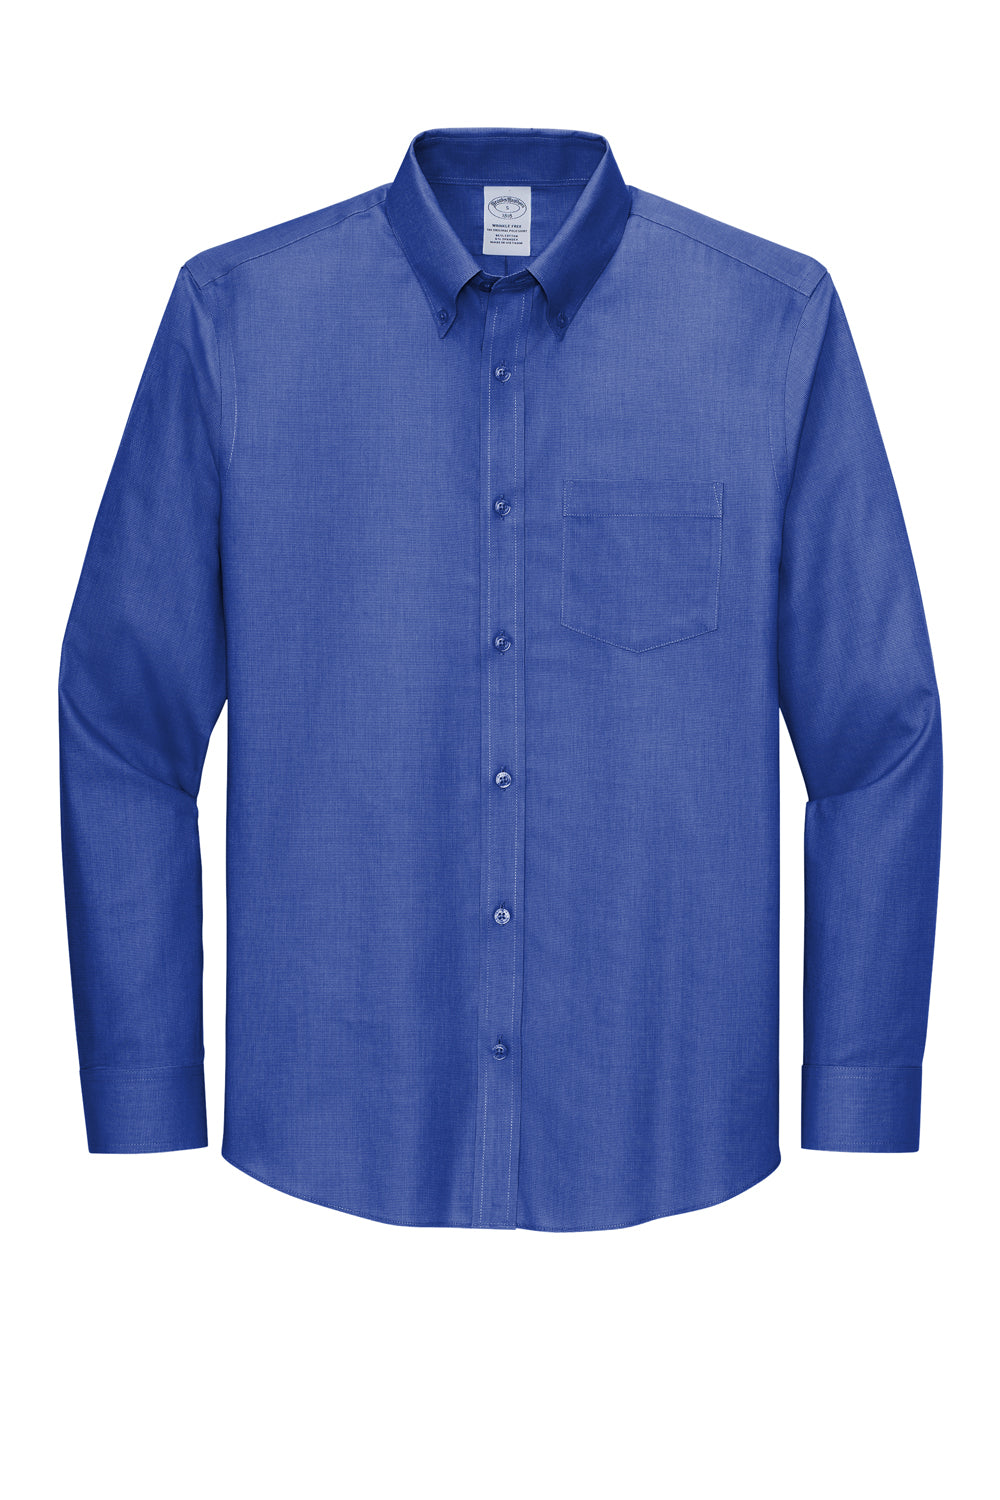 Brooks Brothers Mens Wrinkle Resistant Nailhead Long Sleeve Button Down Shirt w/ Pocket Cobalt Blue Flat Front